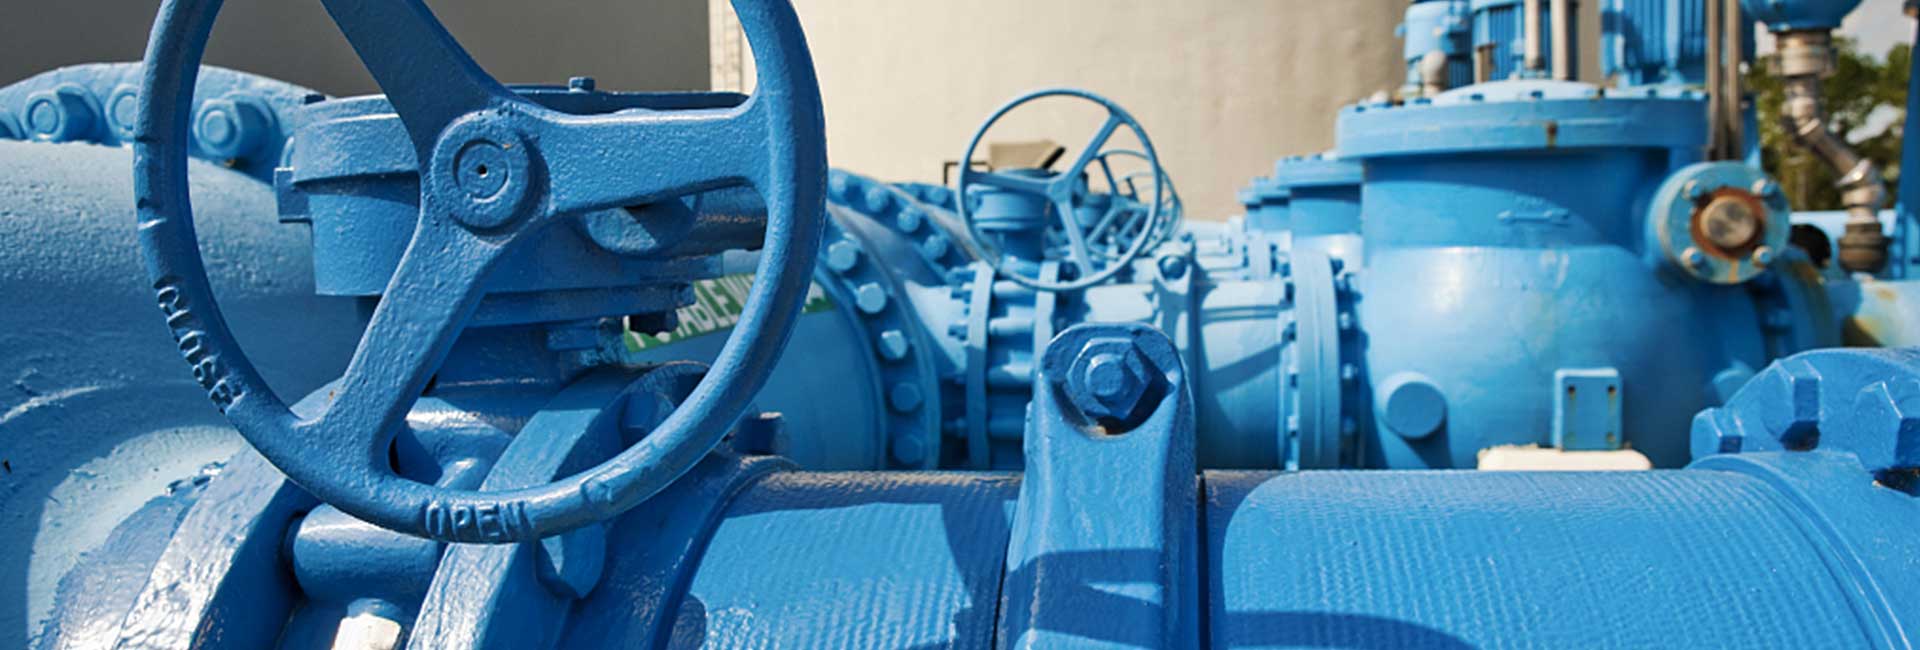 Centrifugal Pump For Sale